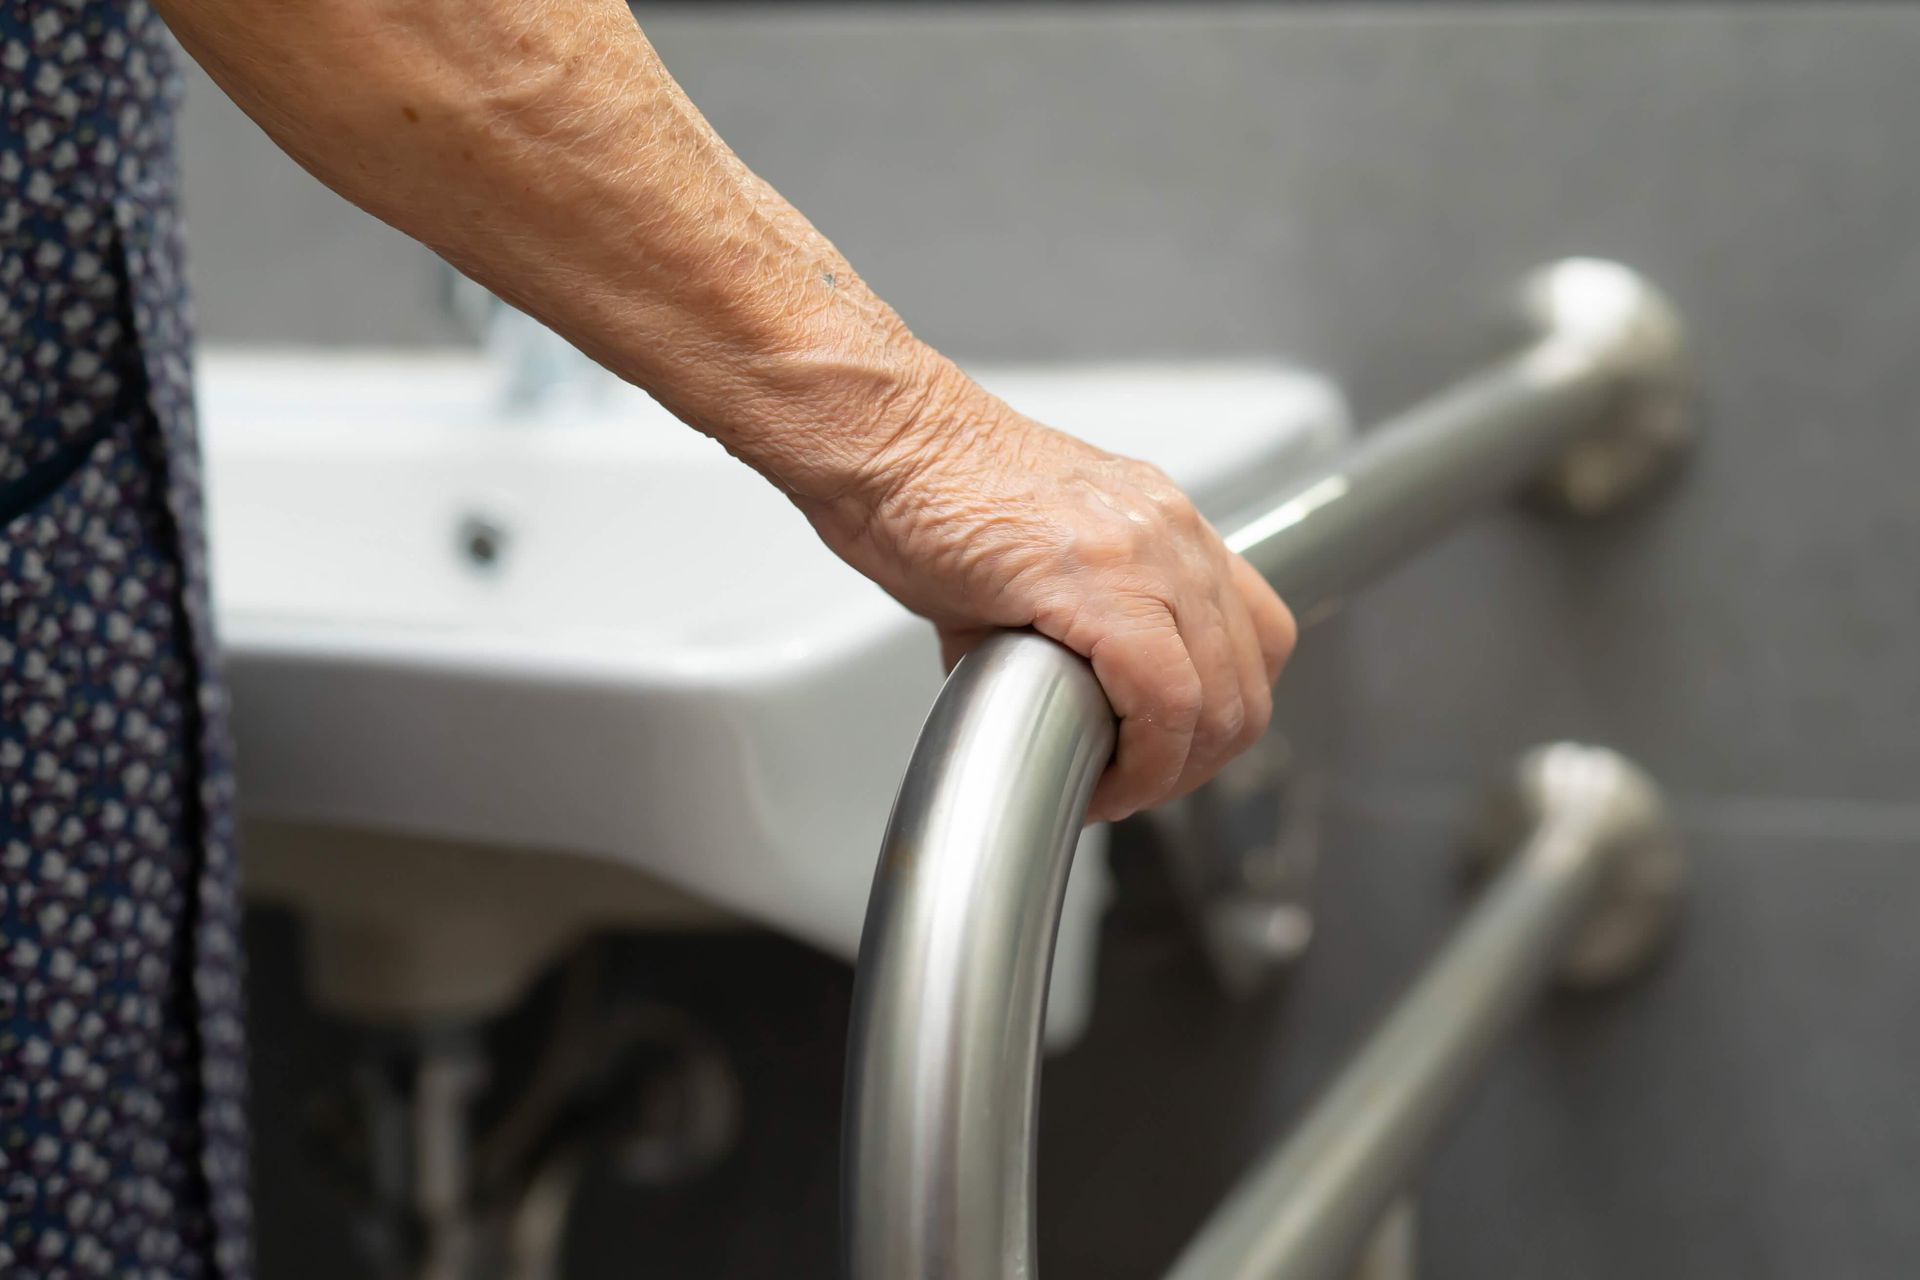 an elderly woman is holding onto a railing in a bathroom.